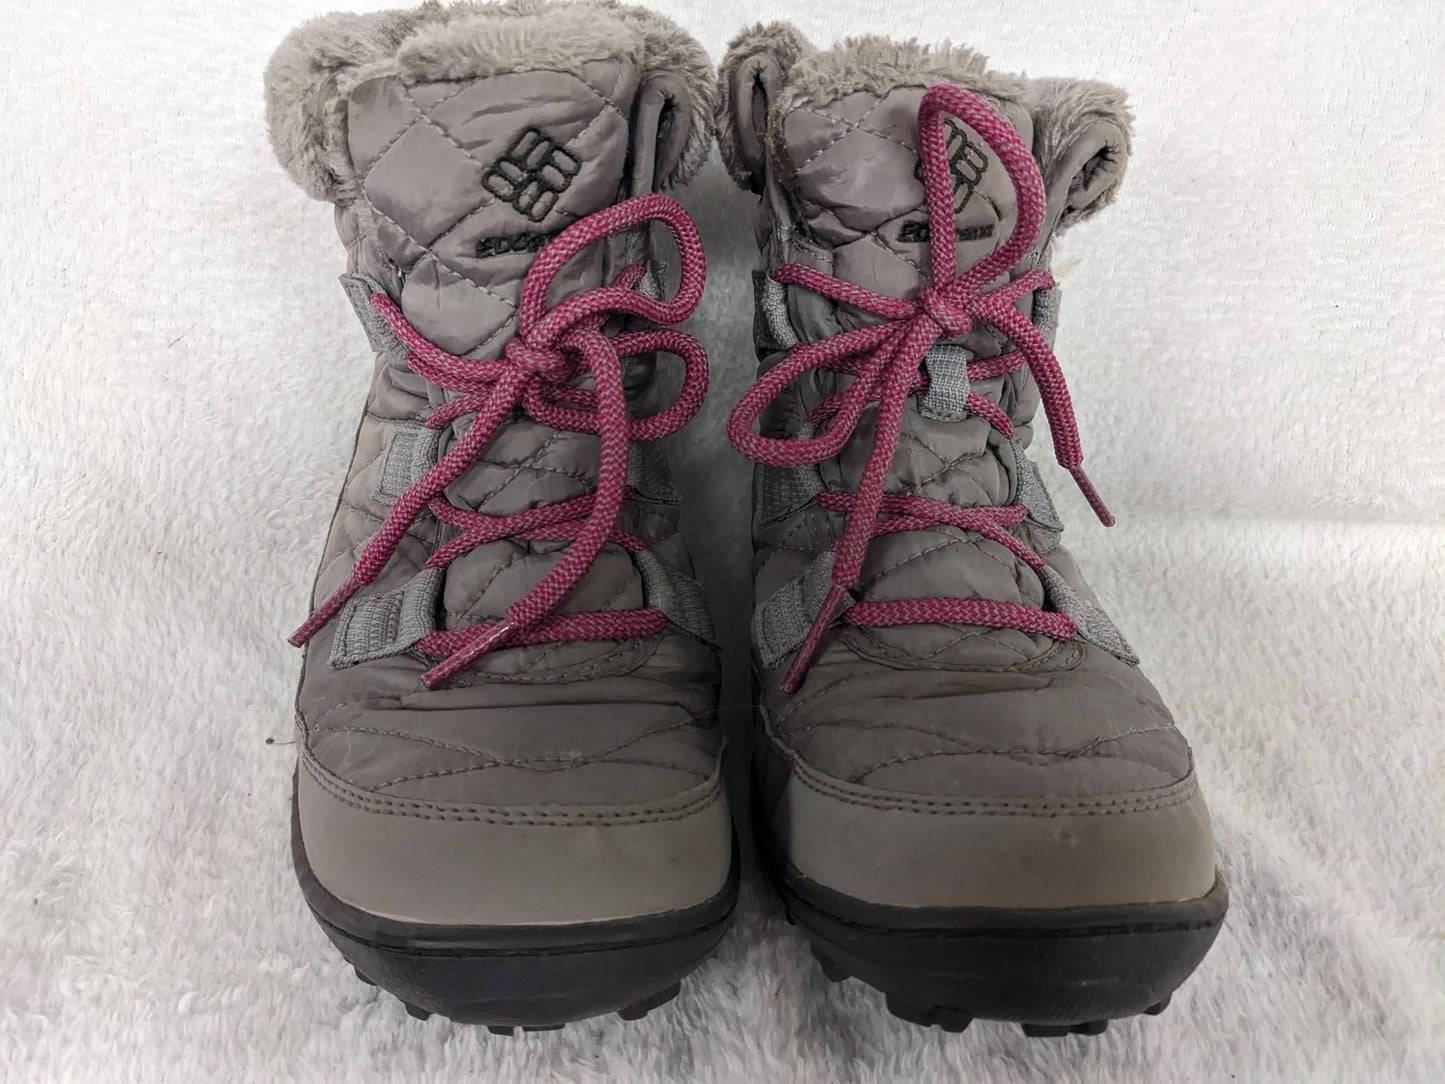 Columbia Waterproof Women's Snow Boots Size 5 Color Gray Condition Used